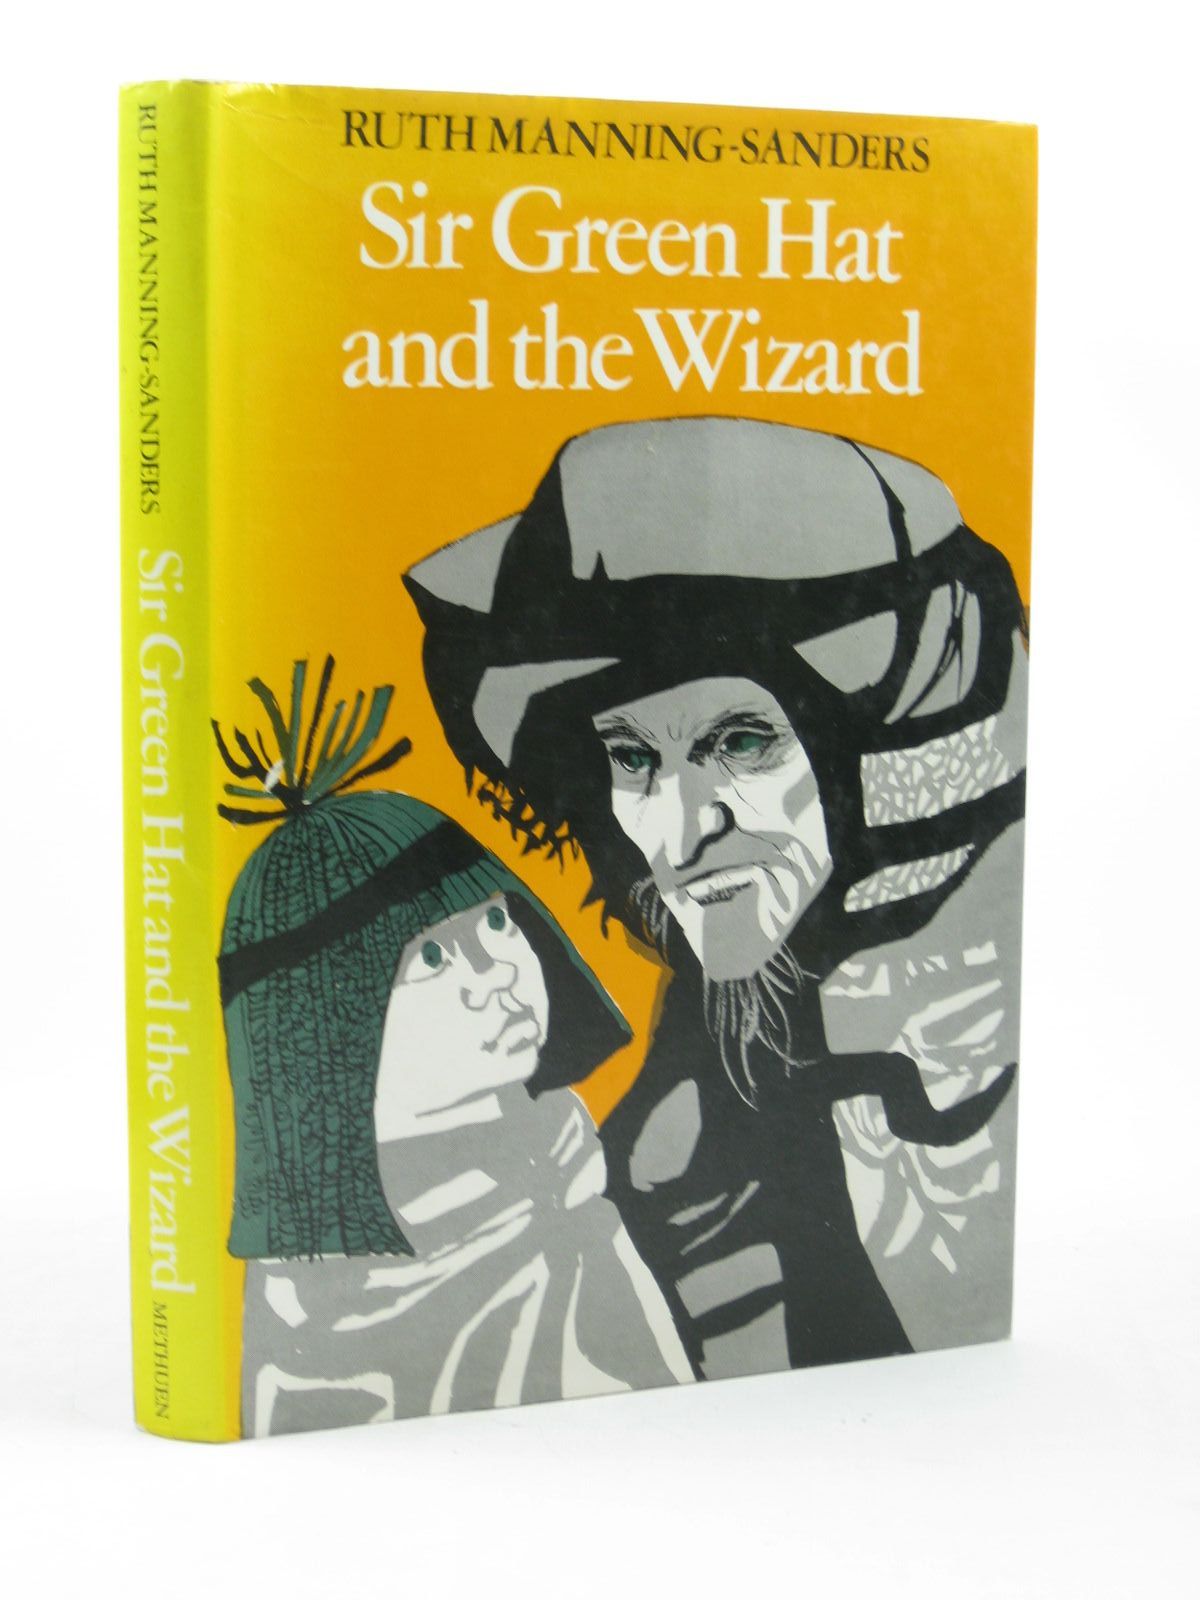 Cover of SIR GREENHAT AND THE WIZARD by Ruth Manning-Sanders